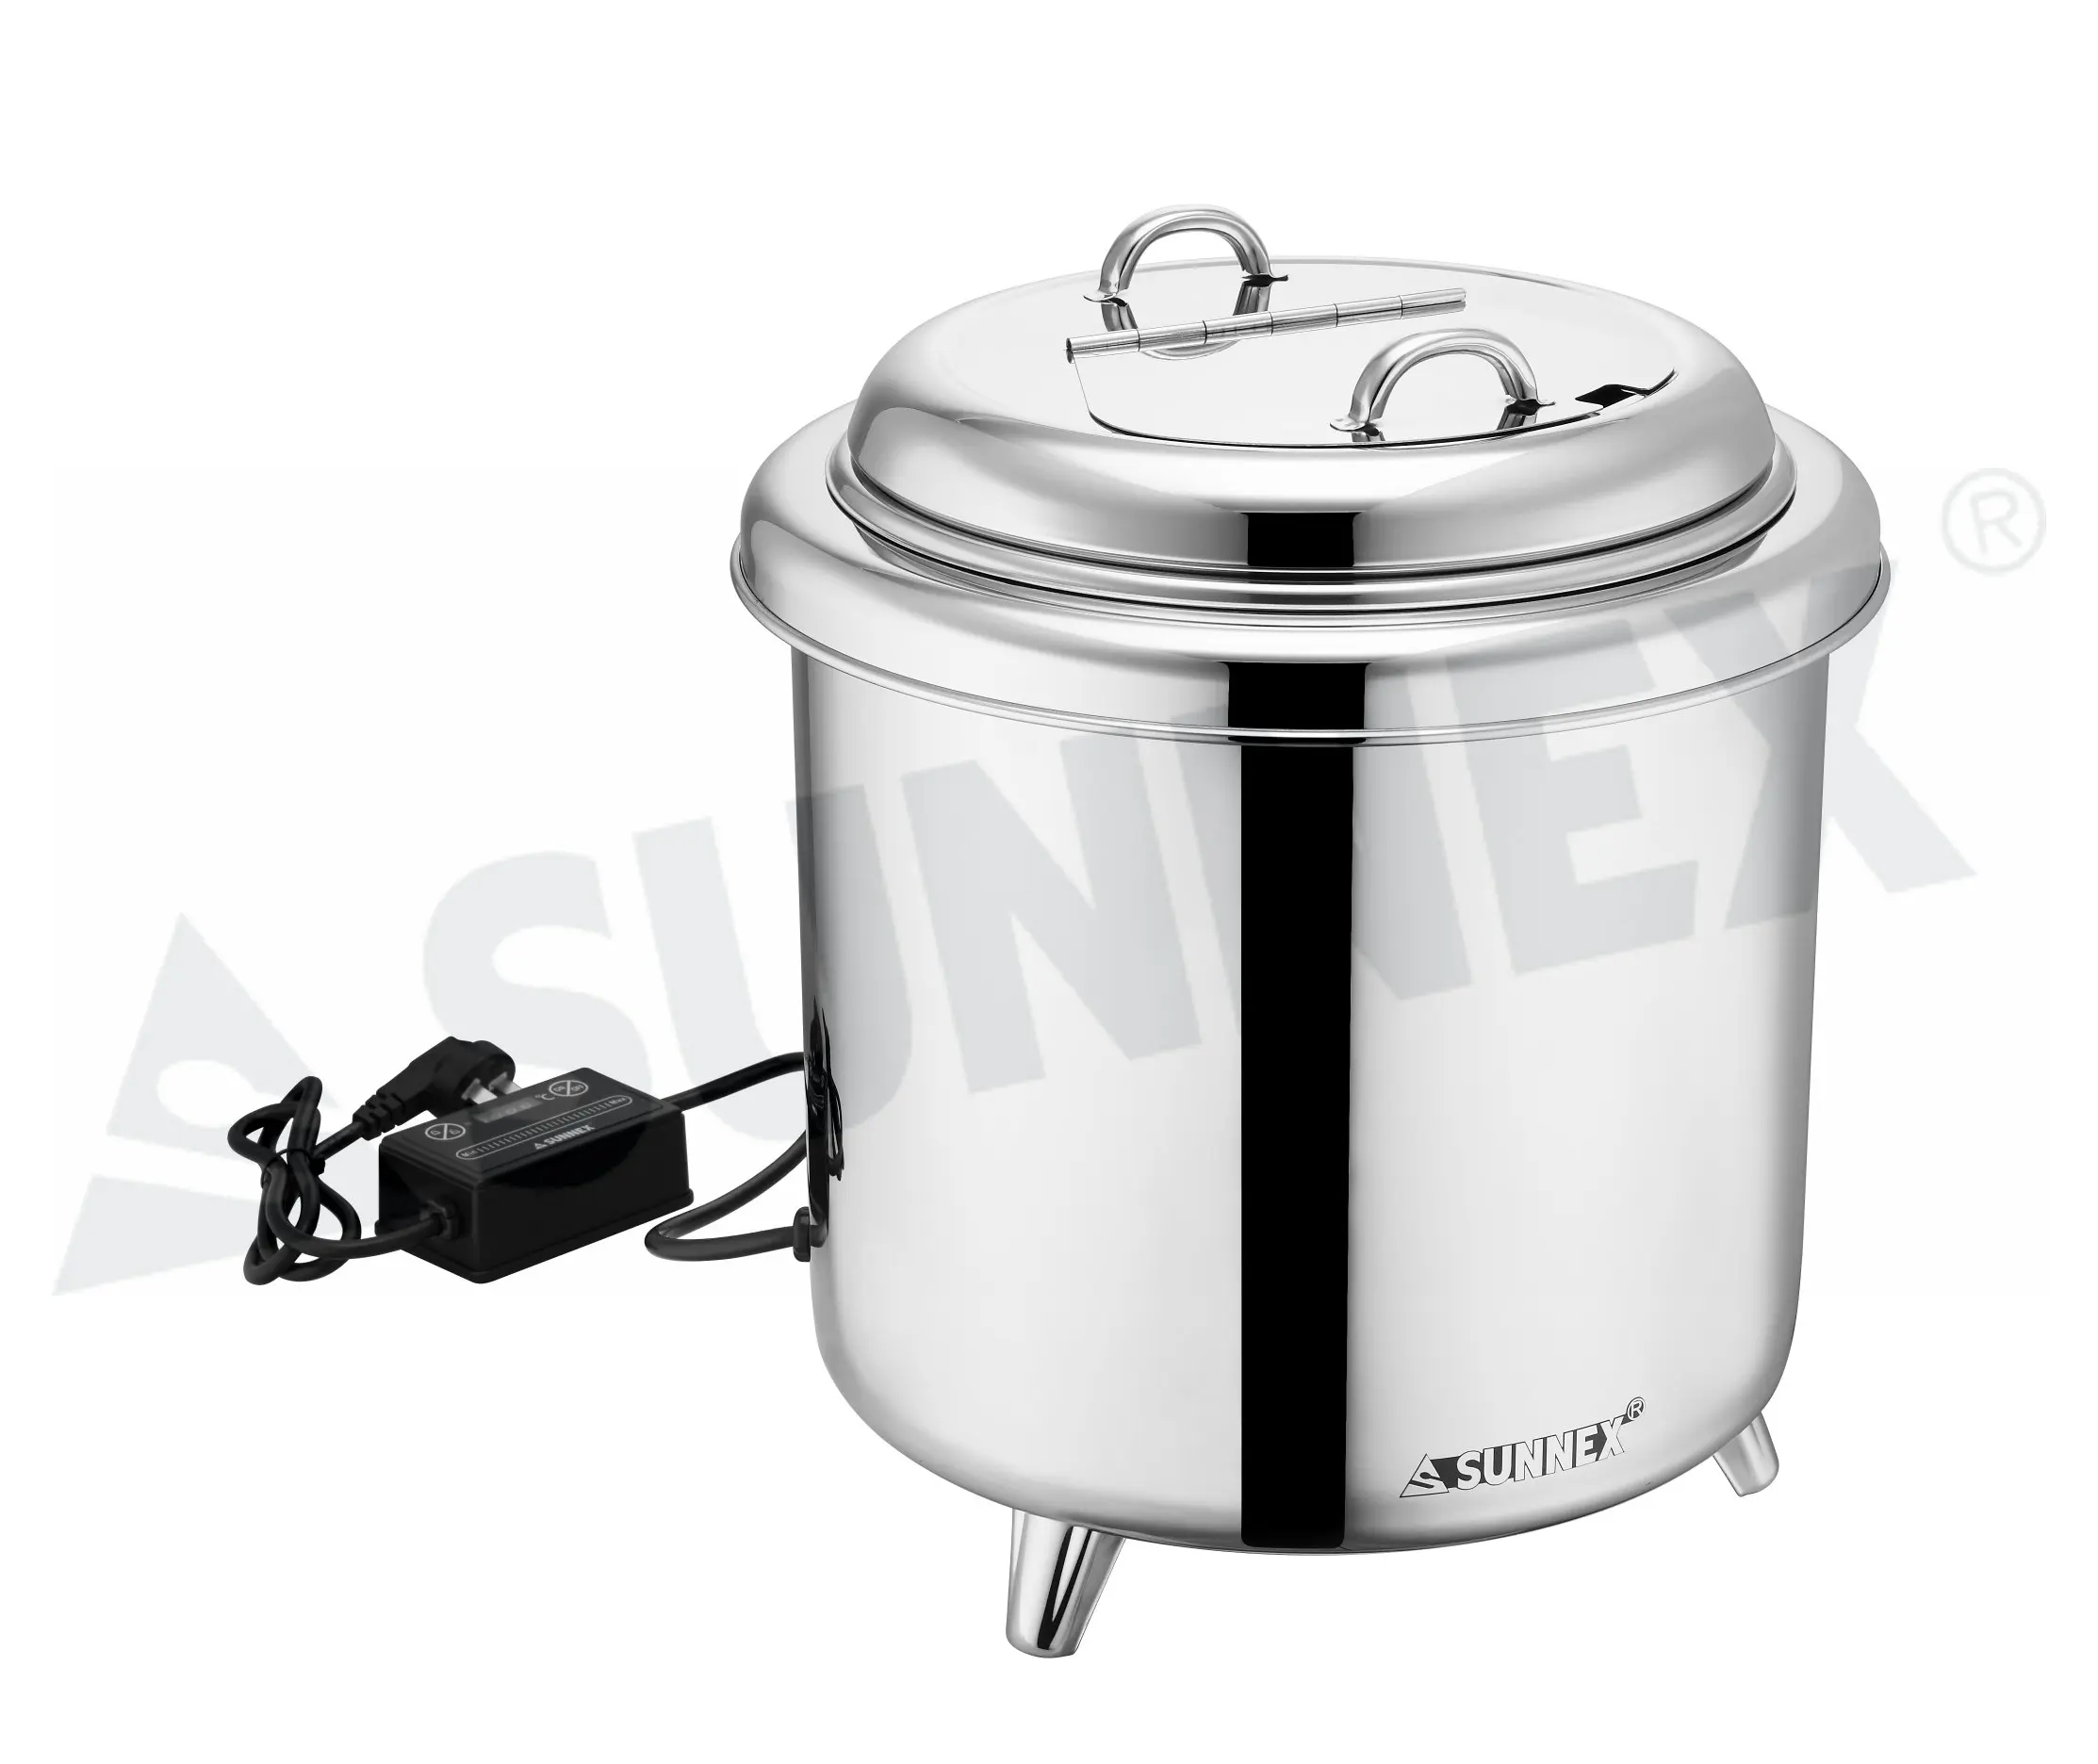 Electric Soup Warmer Stainless Steel Cover & Water Jacket With Ladle -  Sunnex Products Ltd.